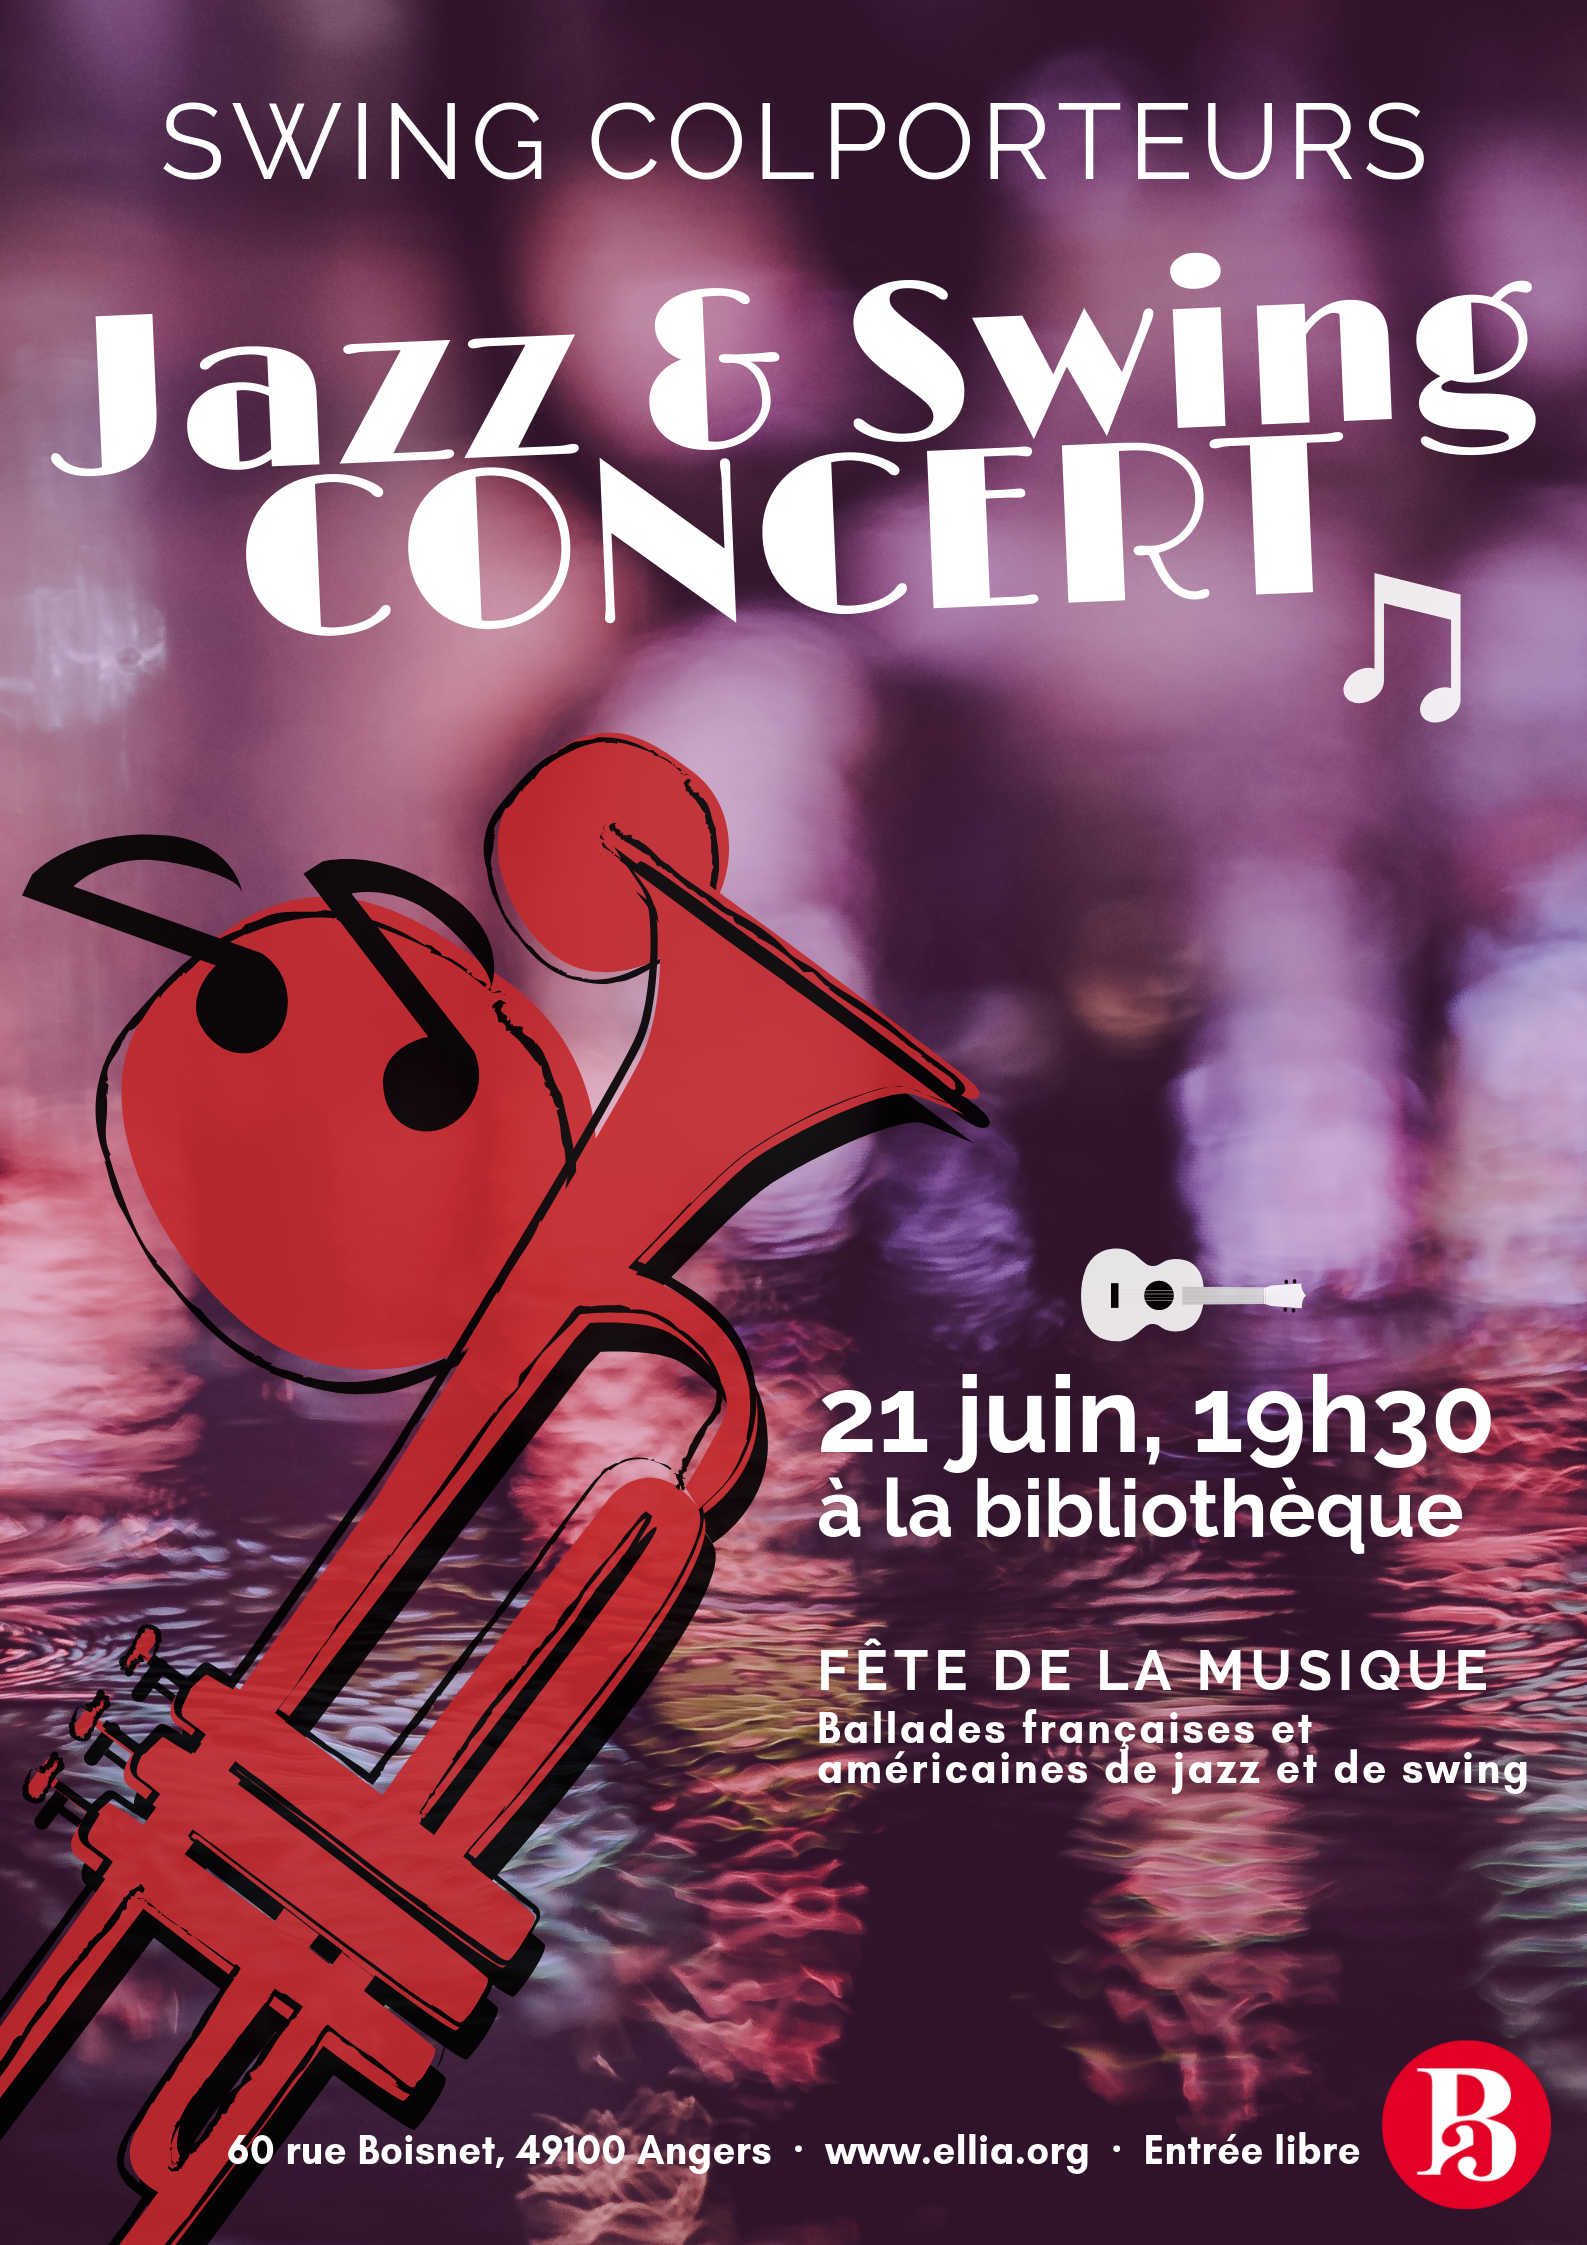 Jazz & Swing Concert at the Library!